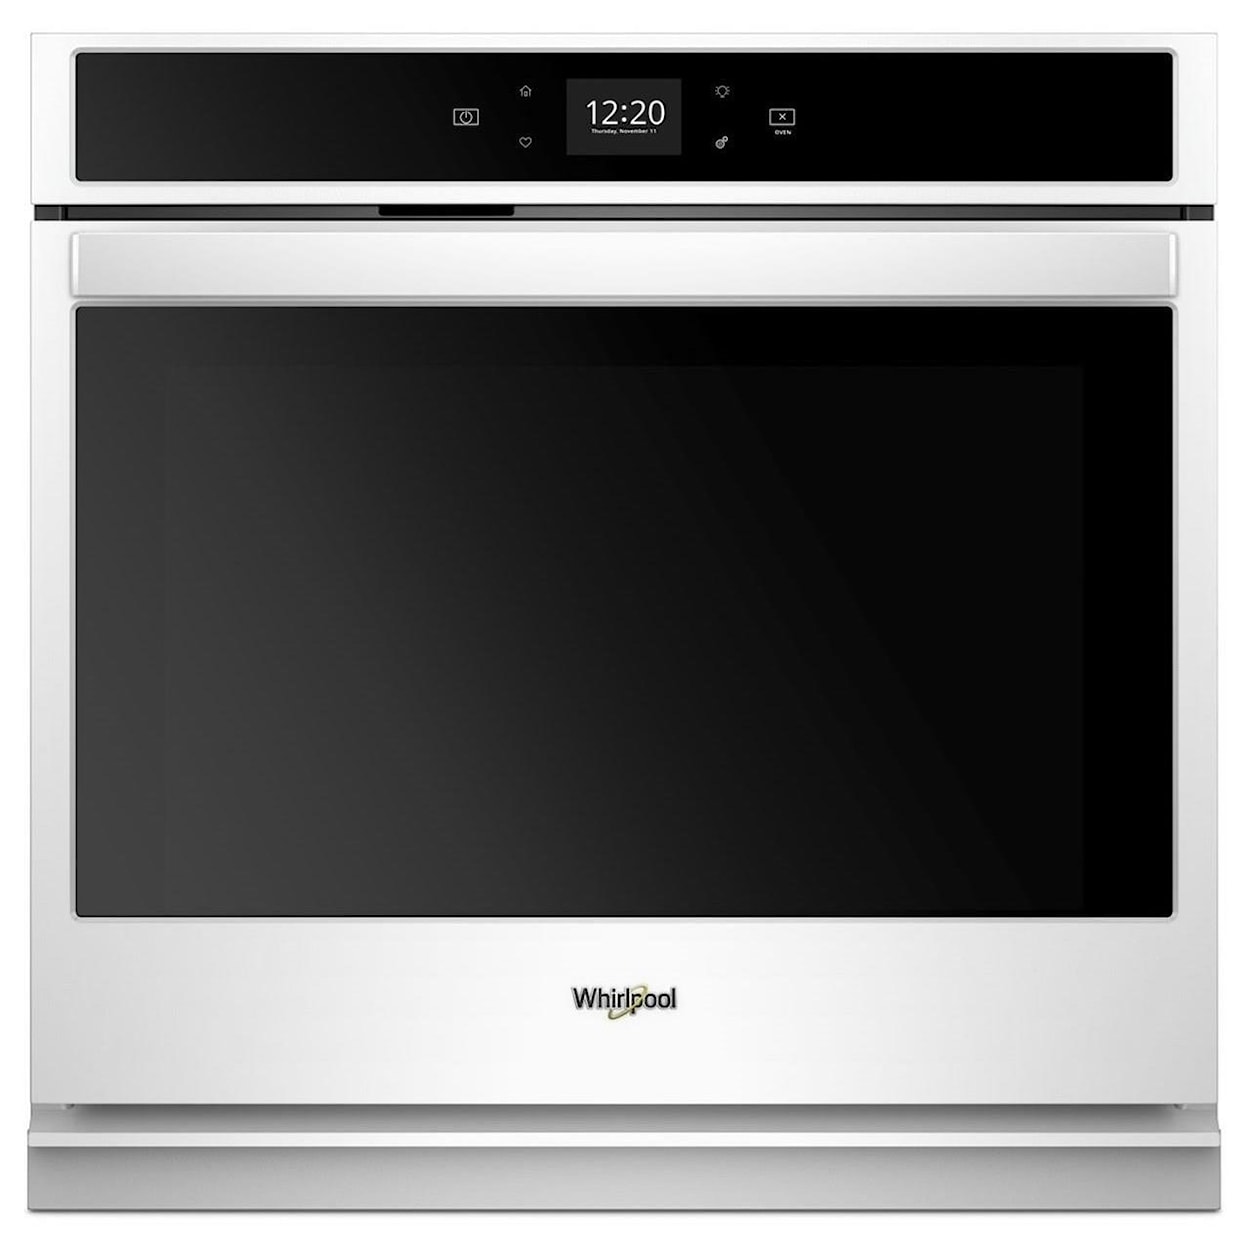 Whirlpool Electric Wall Ovens - Whirlpool 4.3 Cu. Ft. Single Wall Oven